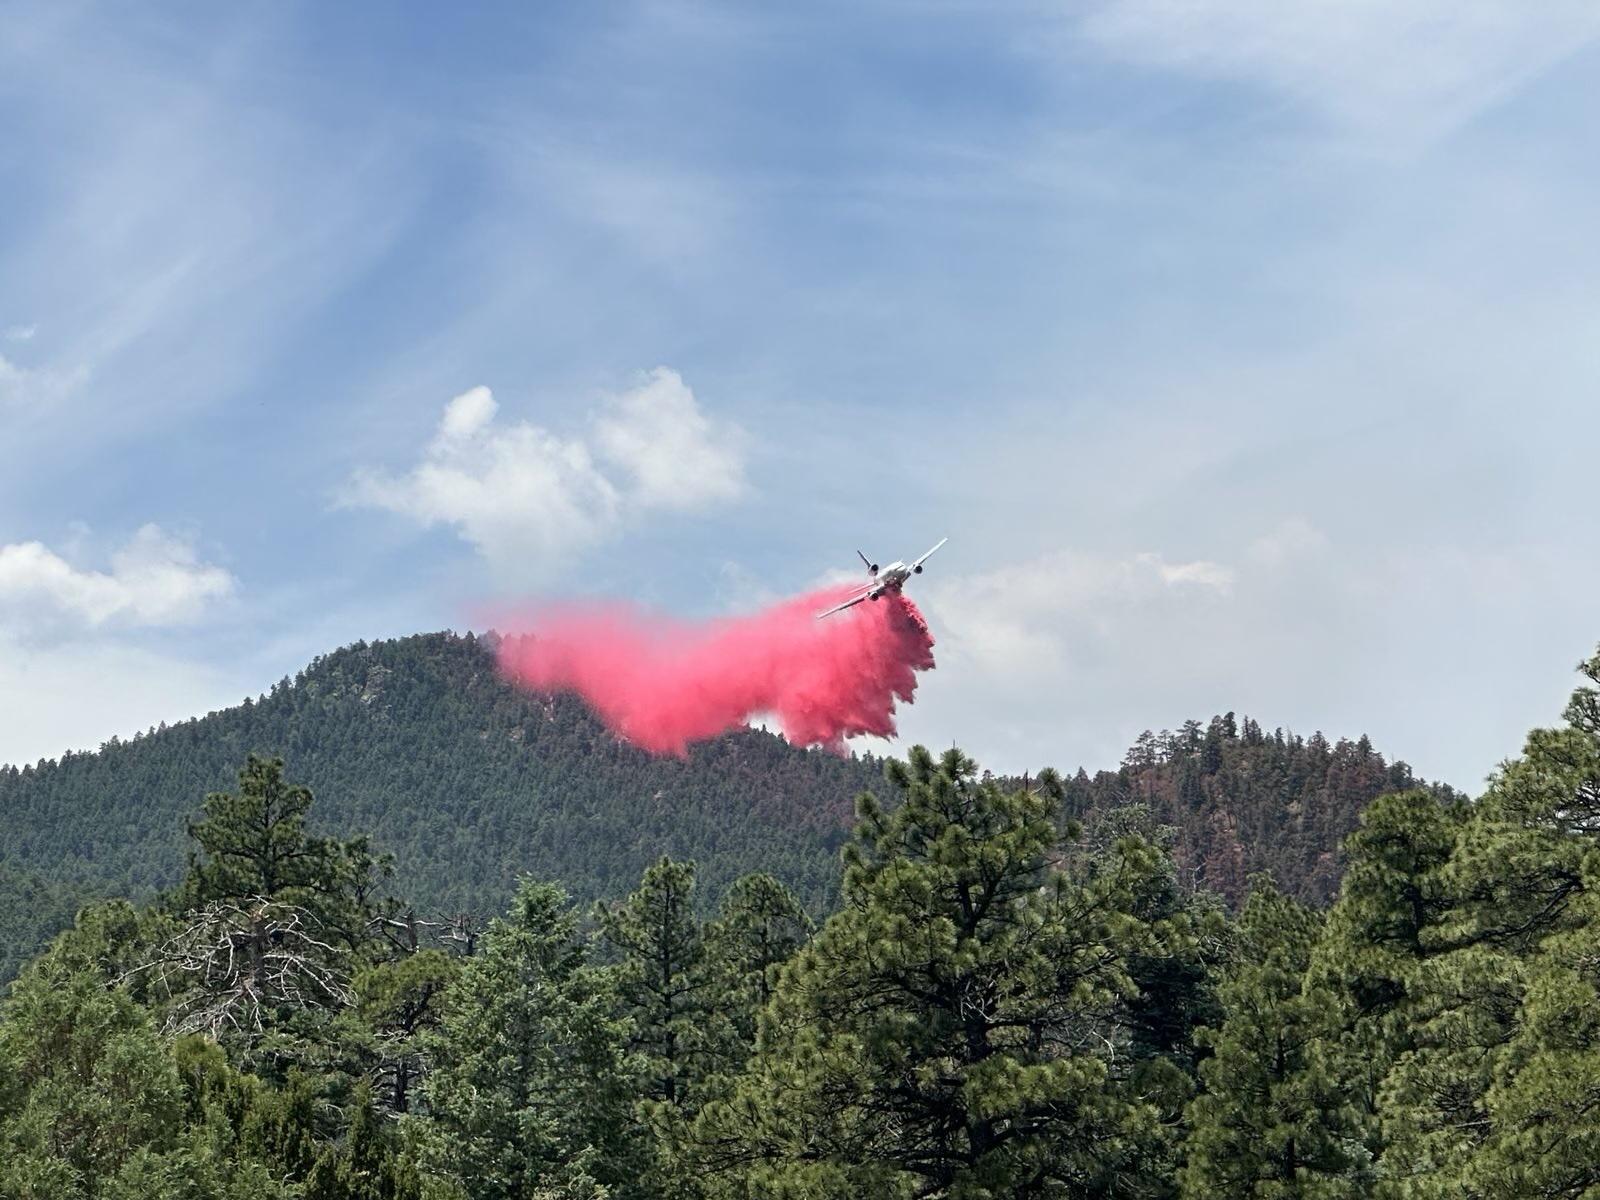 An air tanker drops a load of red fire retardant above evergreen filled mountain backdrop. 